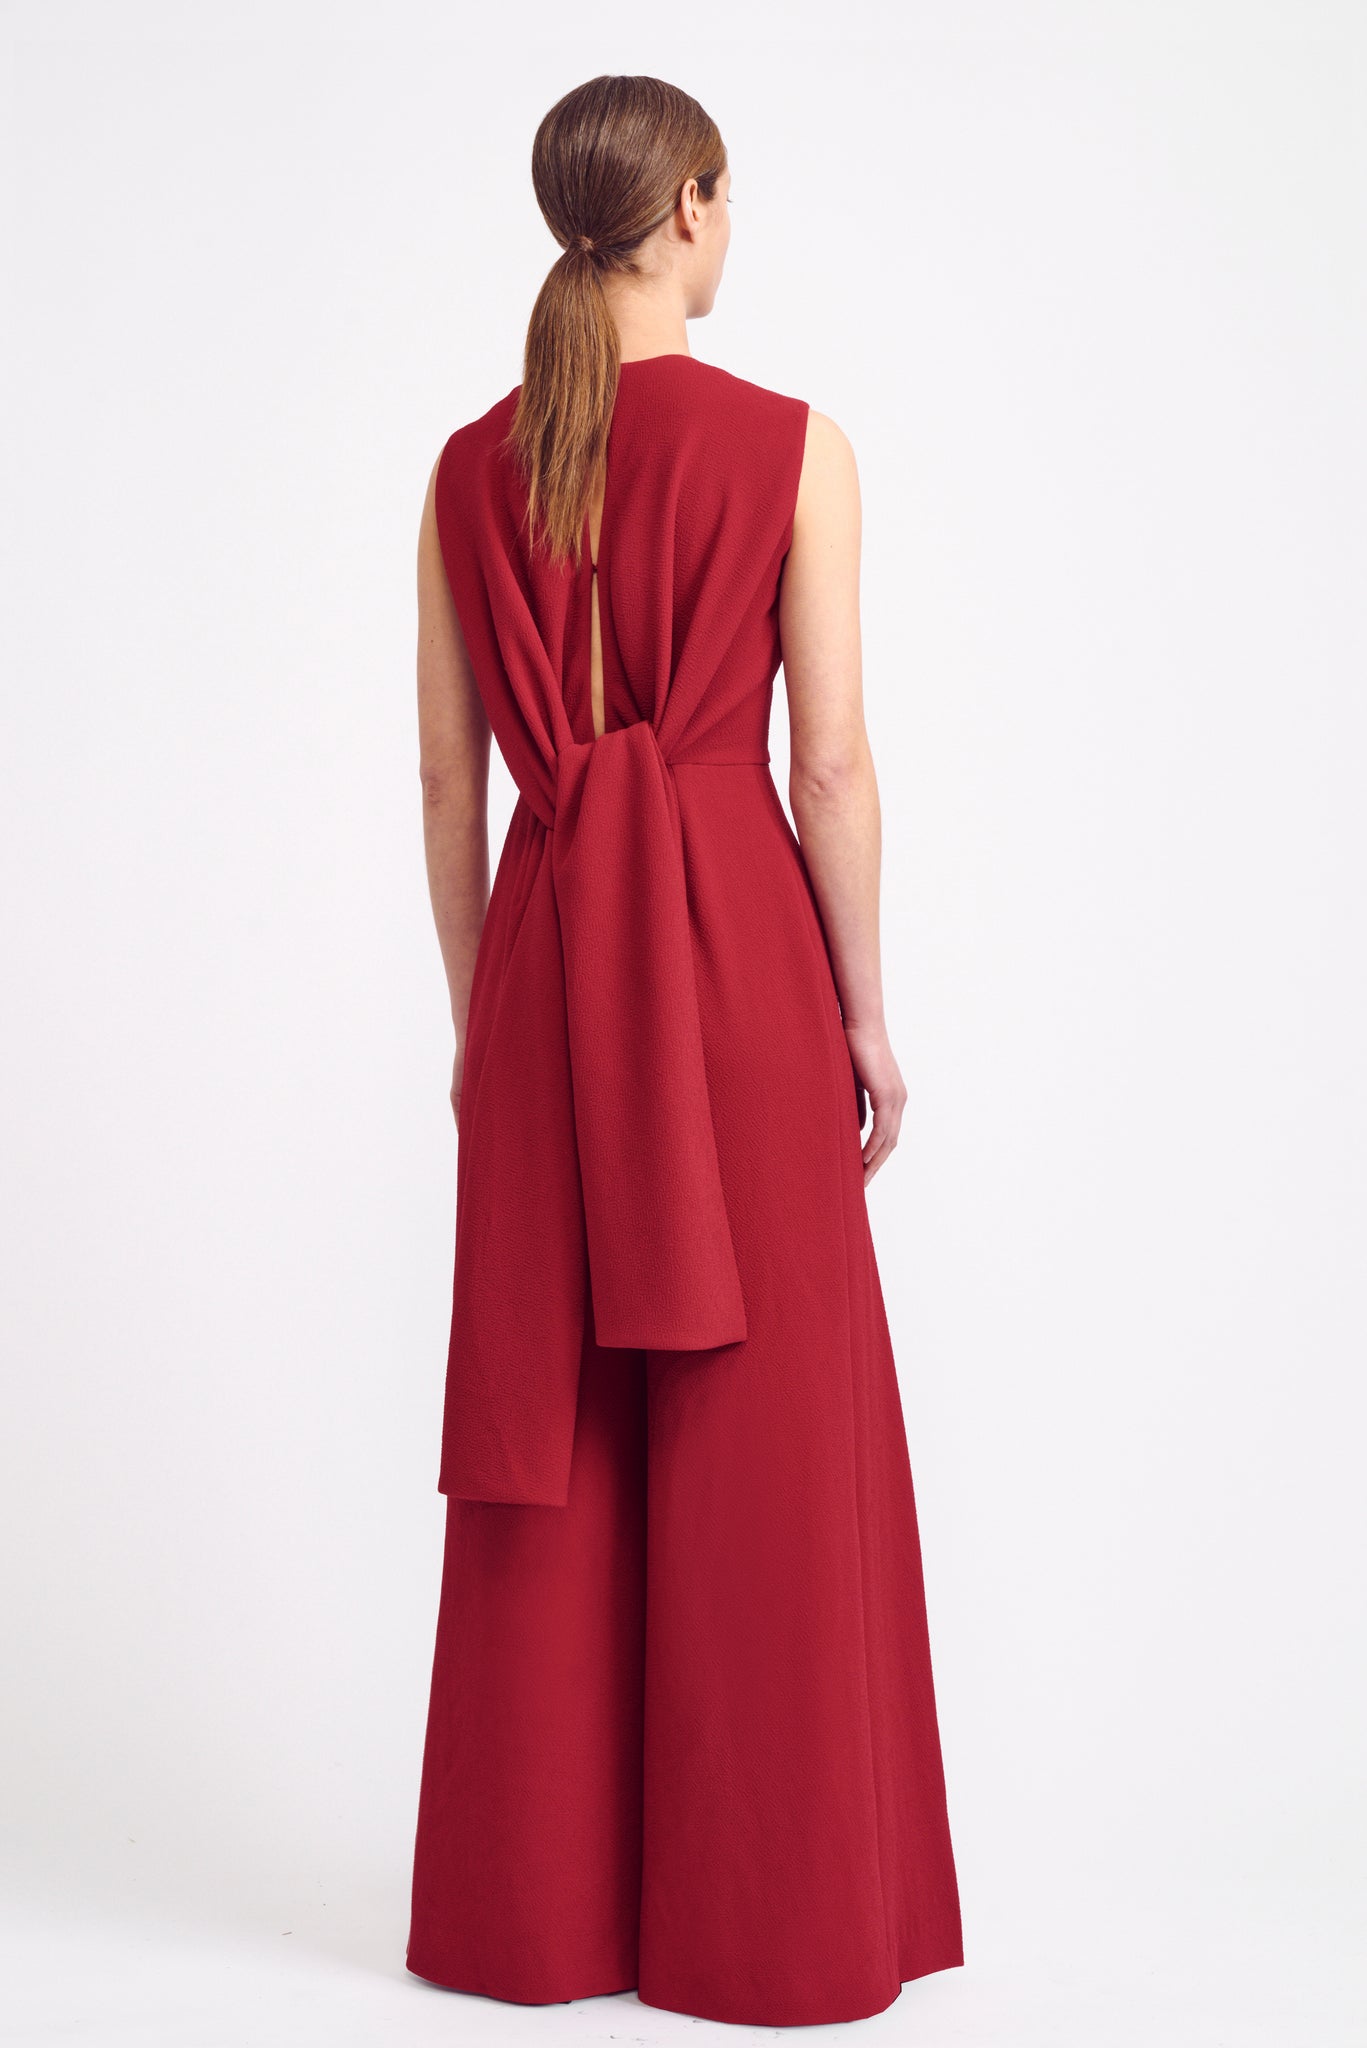 Charmaine Tie-Back Jumpsuit in Red Double Crepe | Emilia Wickstead